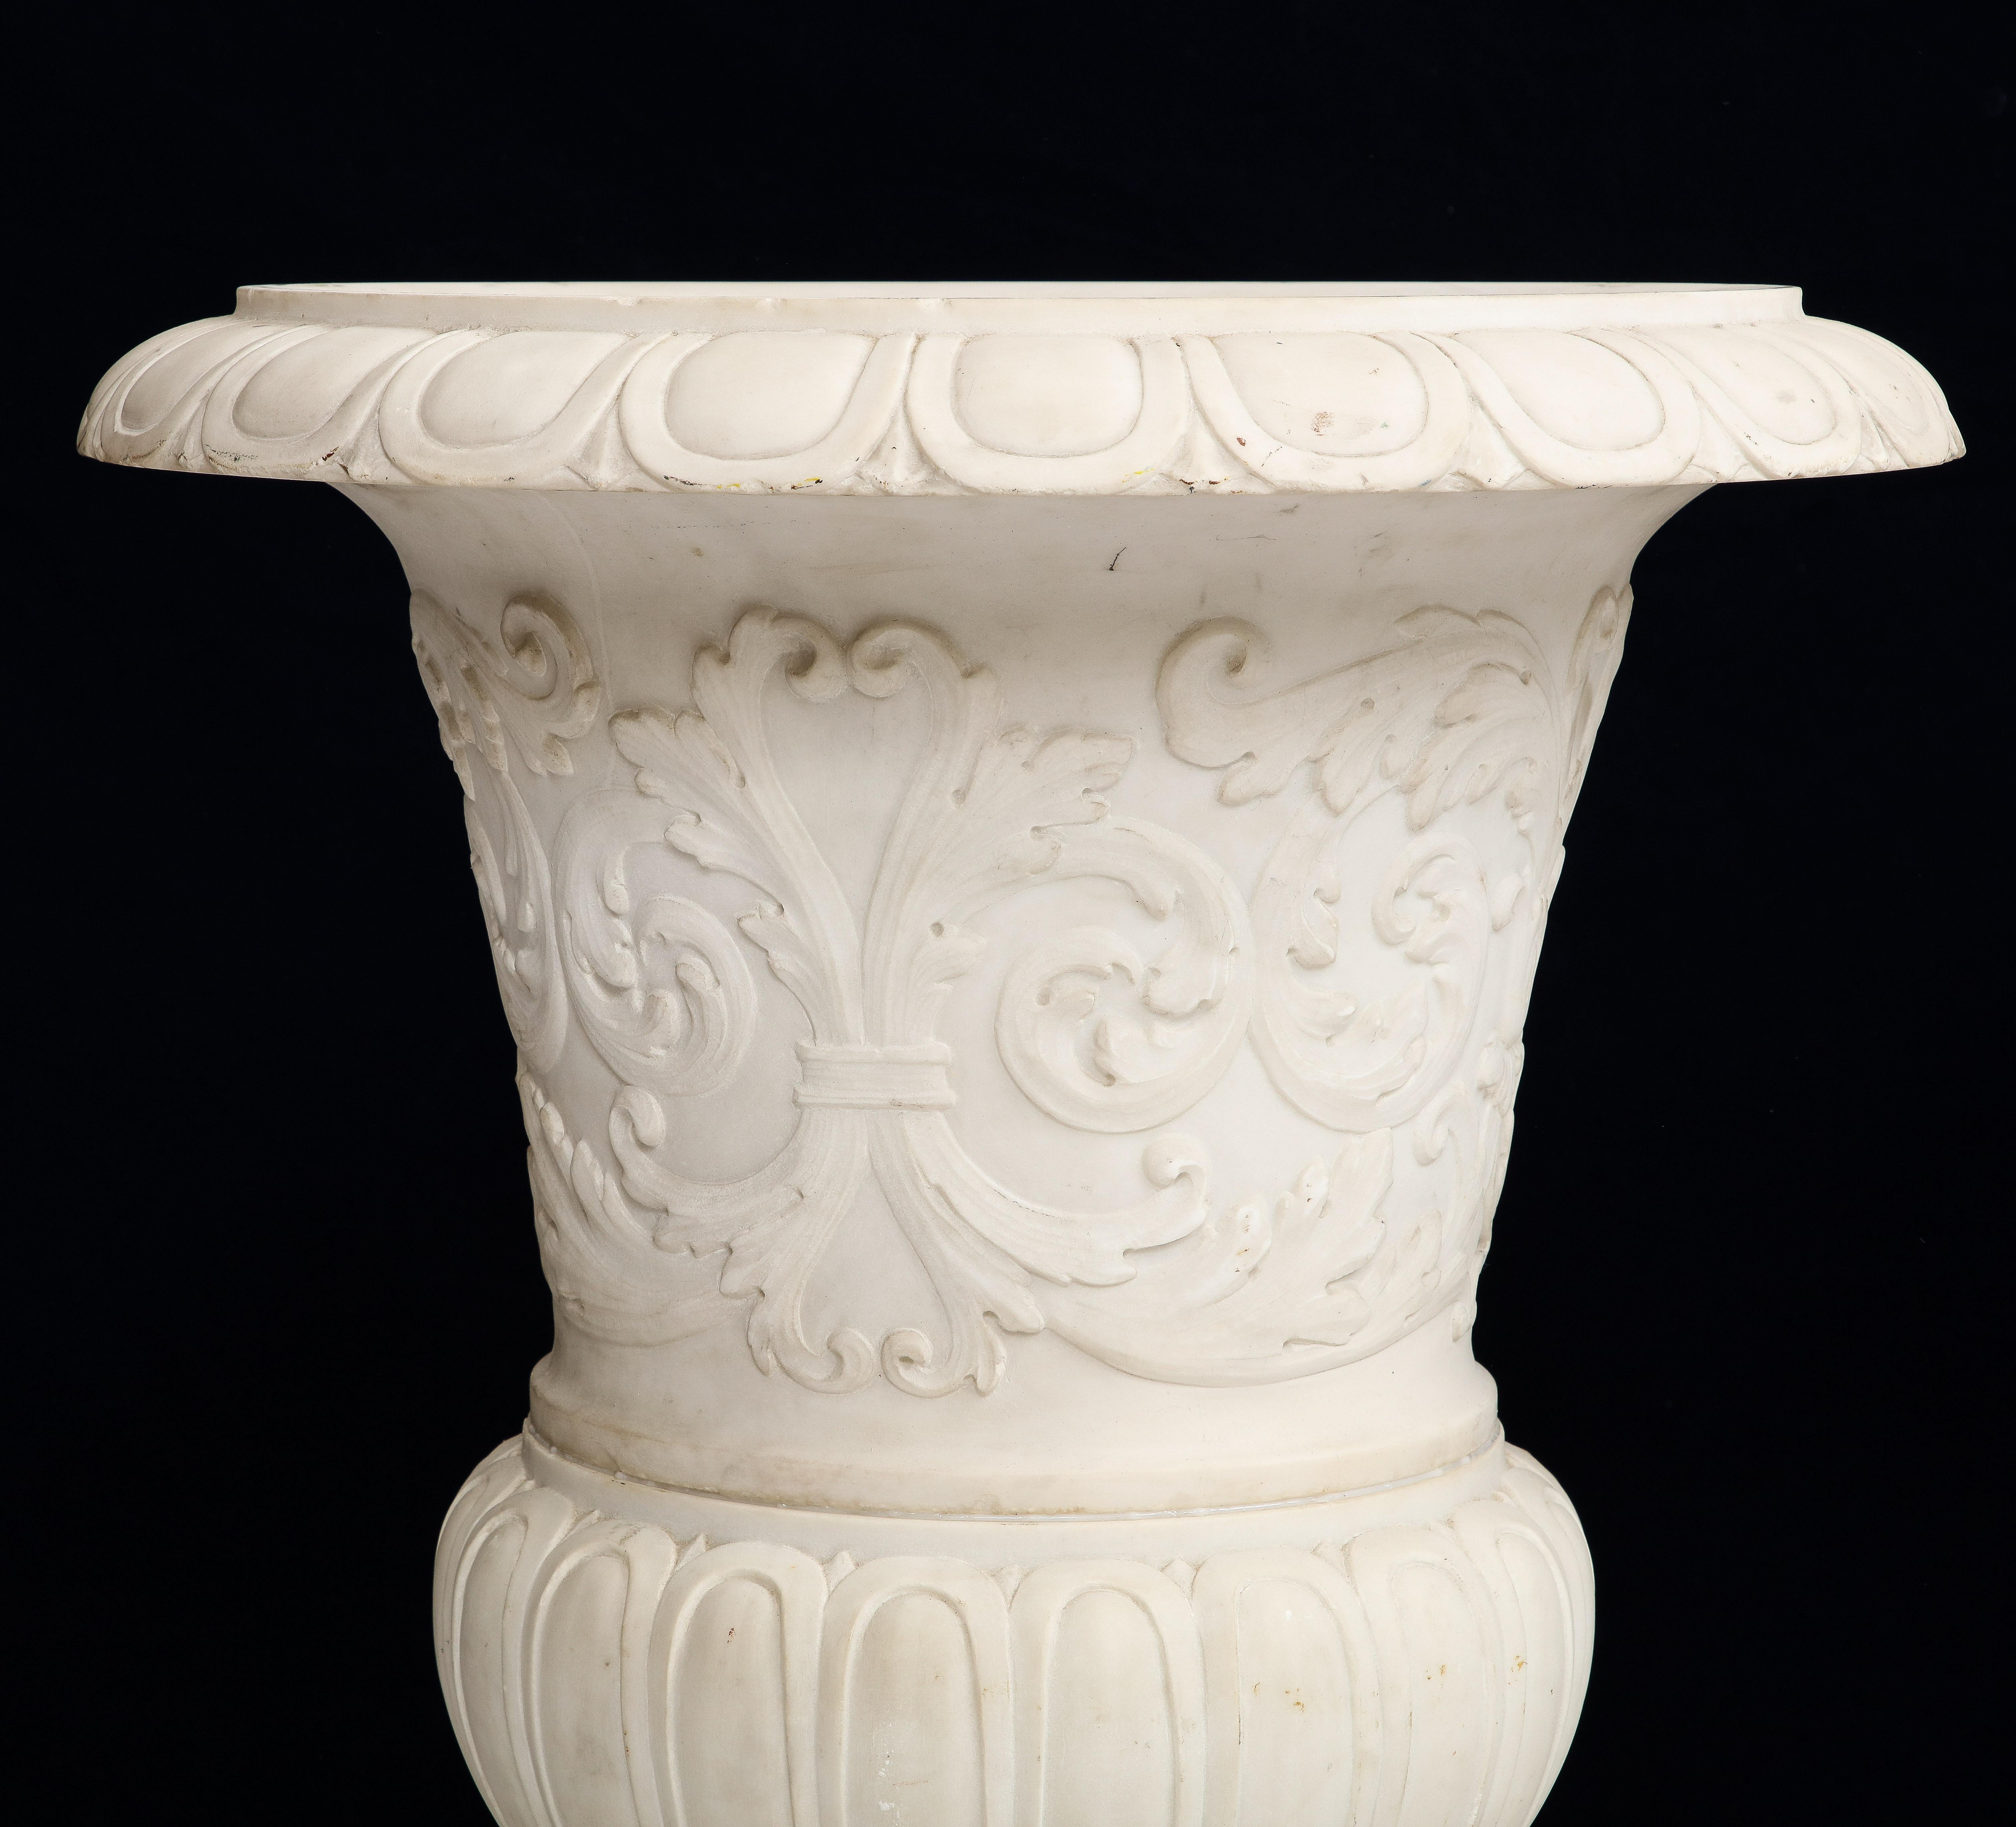 Pair of Italian Carrara Marble Medici Vases w/ Neoclassical Motifs in Relief For Sale 5